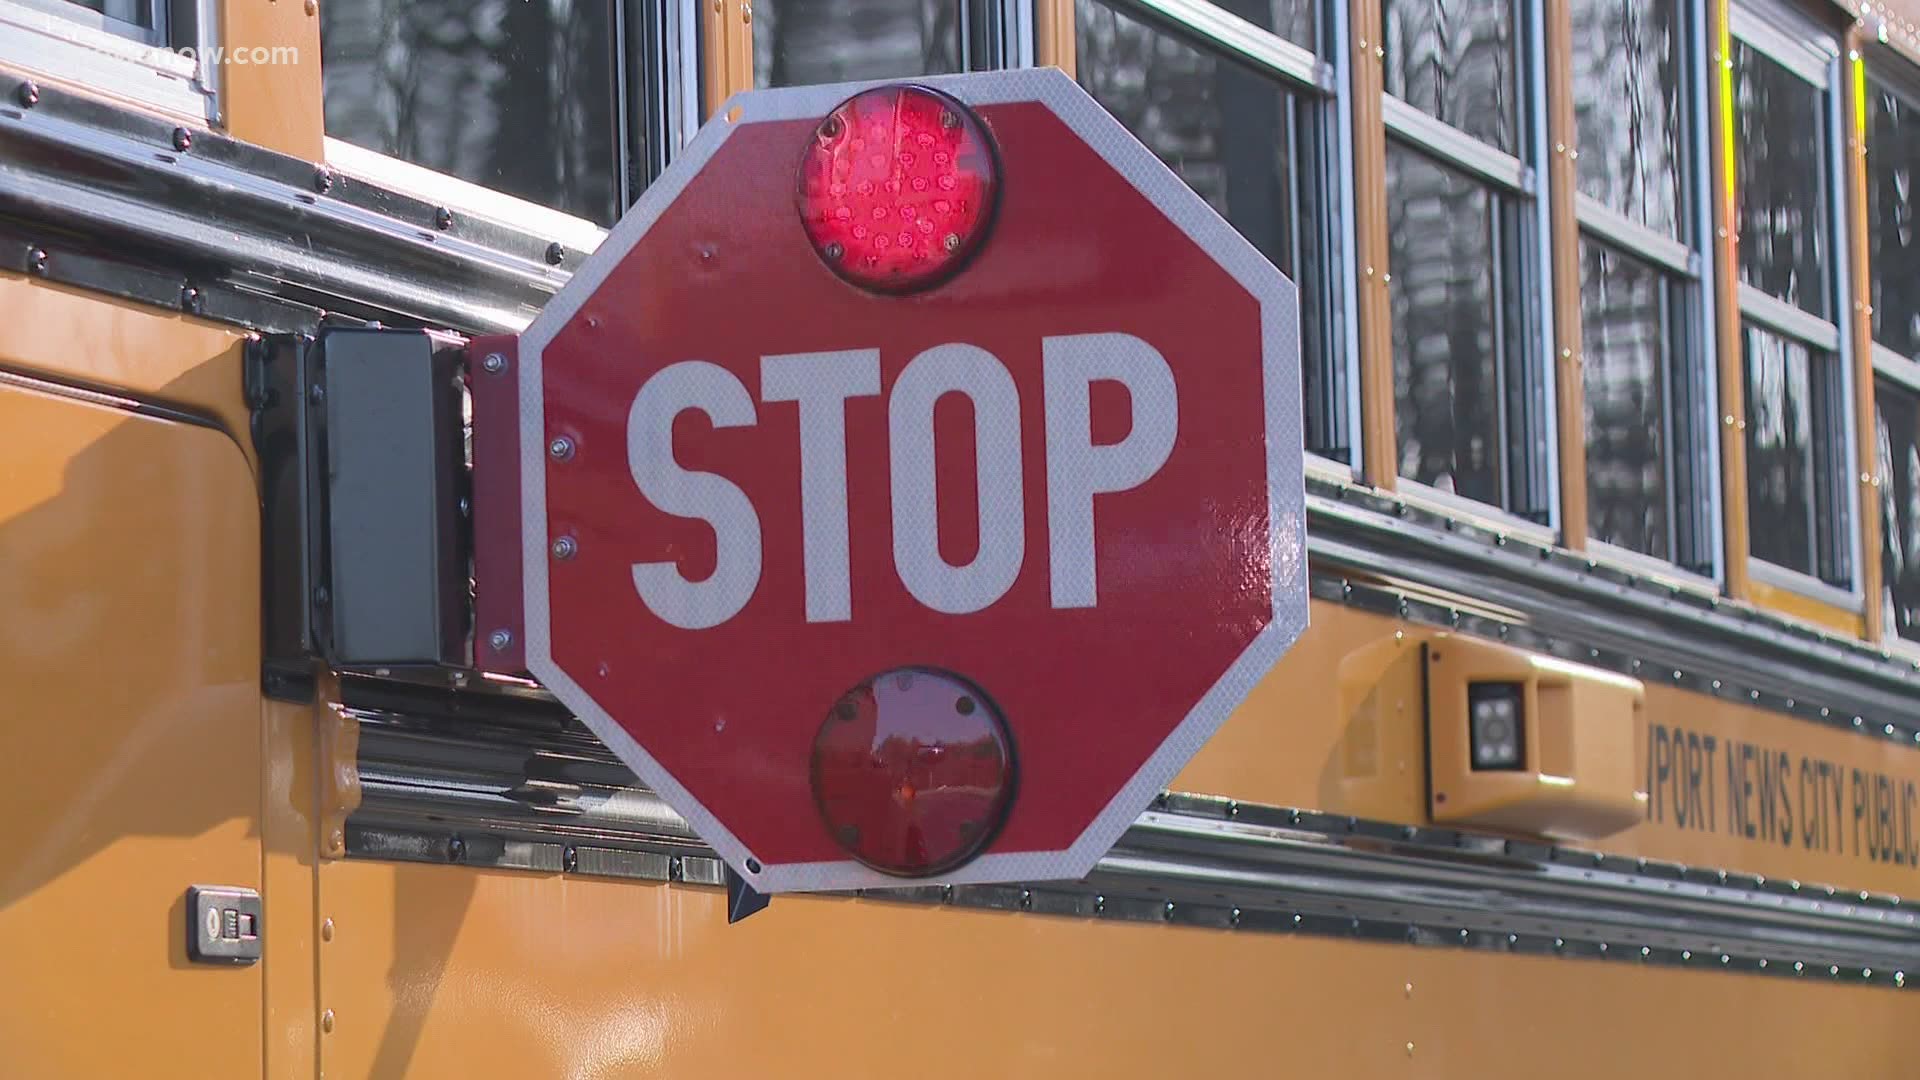 In Newport News, there's a disturbing trend of drivers not stopping when students are getting on and off the bus.